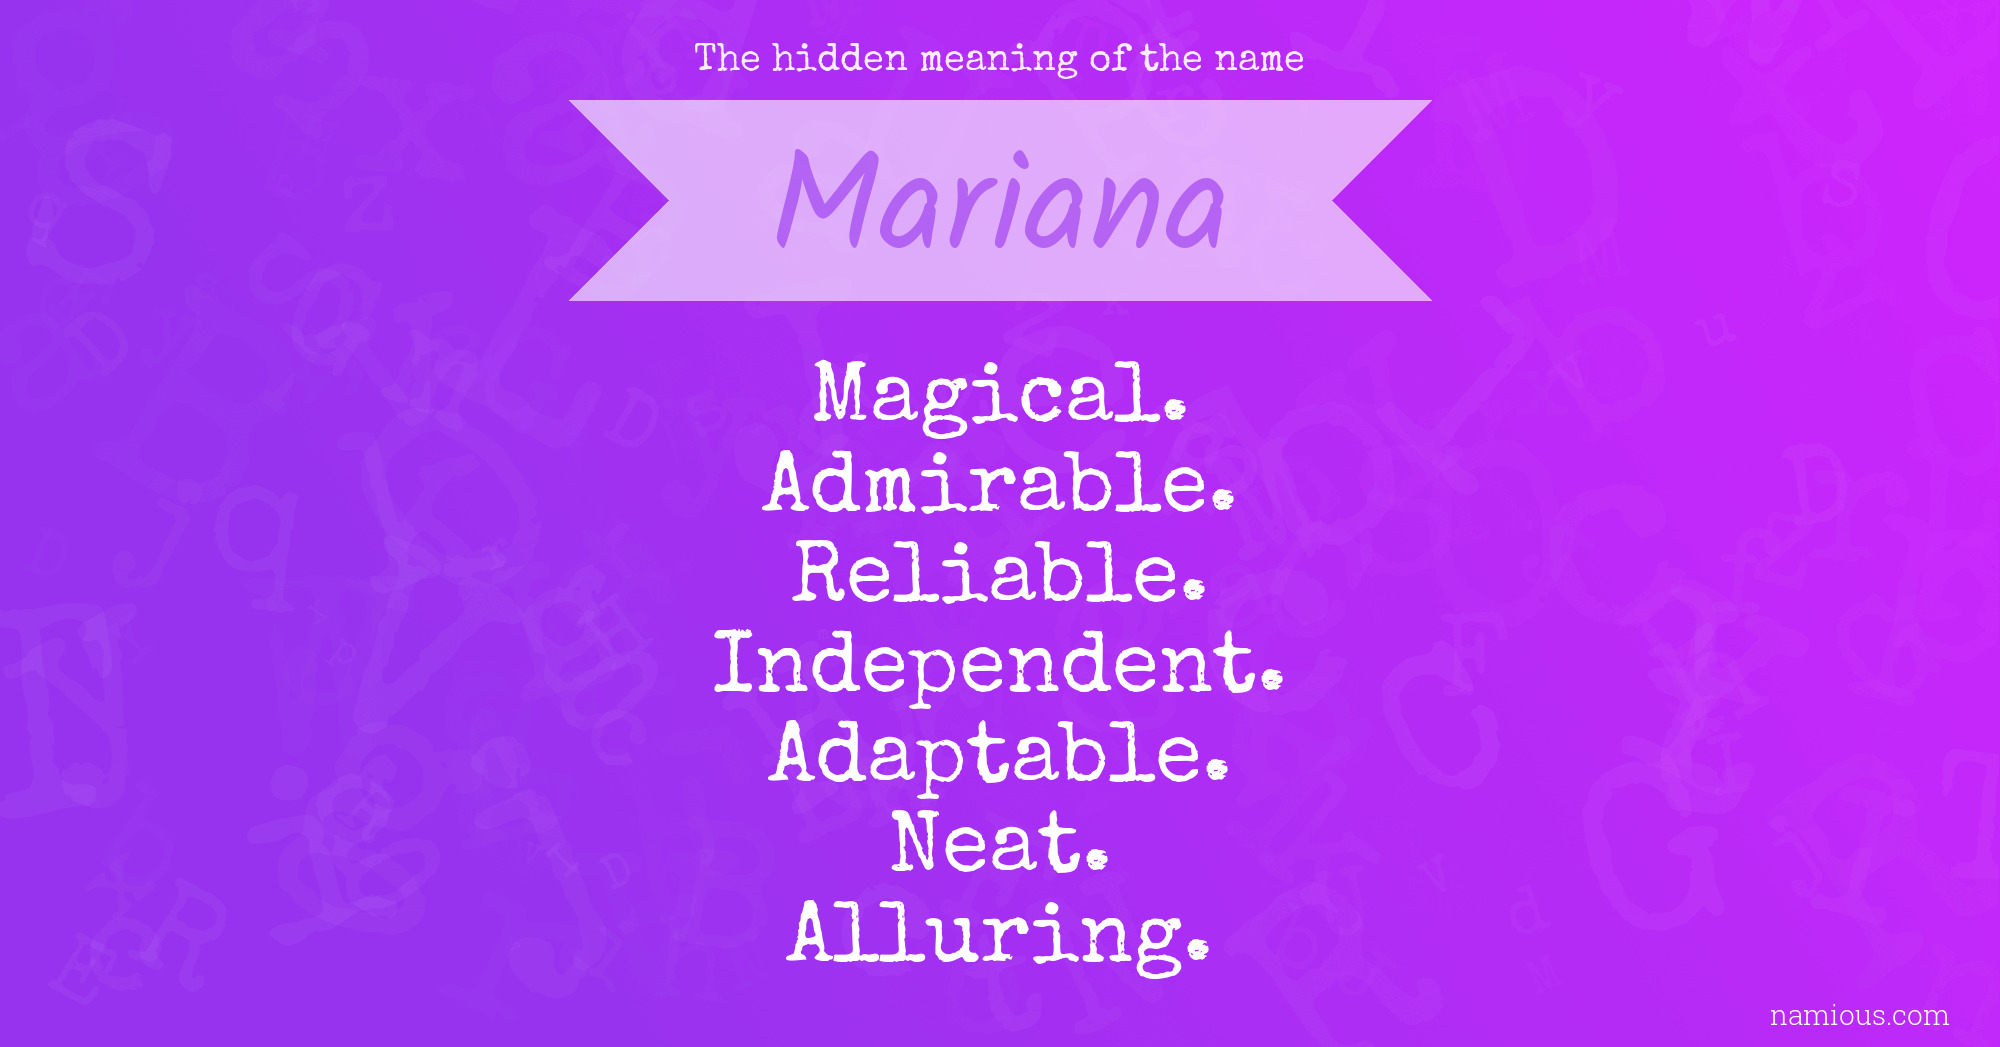 The hidden meaning of the name Mariana